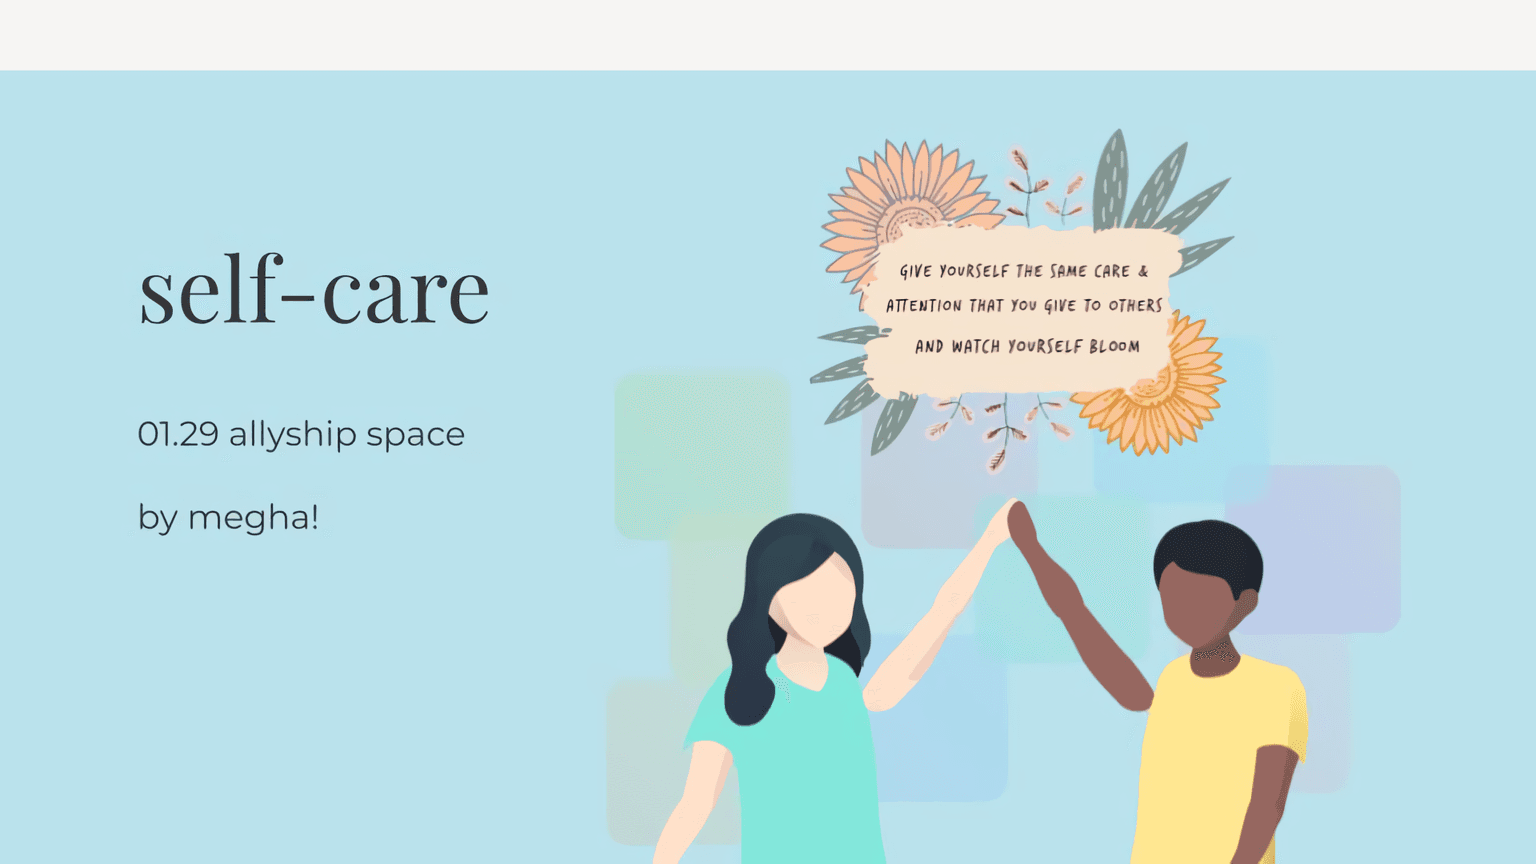 a slide deck that says "self-care, an allyship space by megha!" with a caption "give yourself the same care and attention that you give to others and watch yourself bloom"